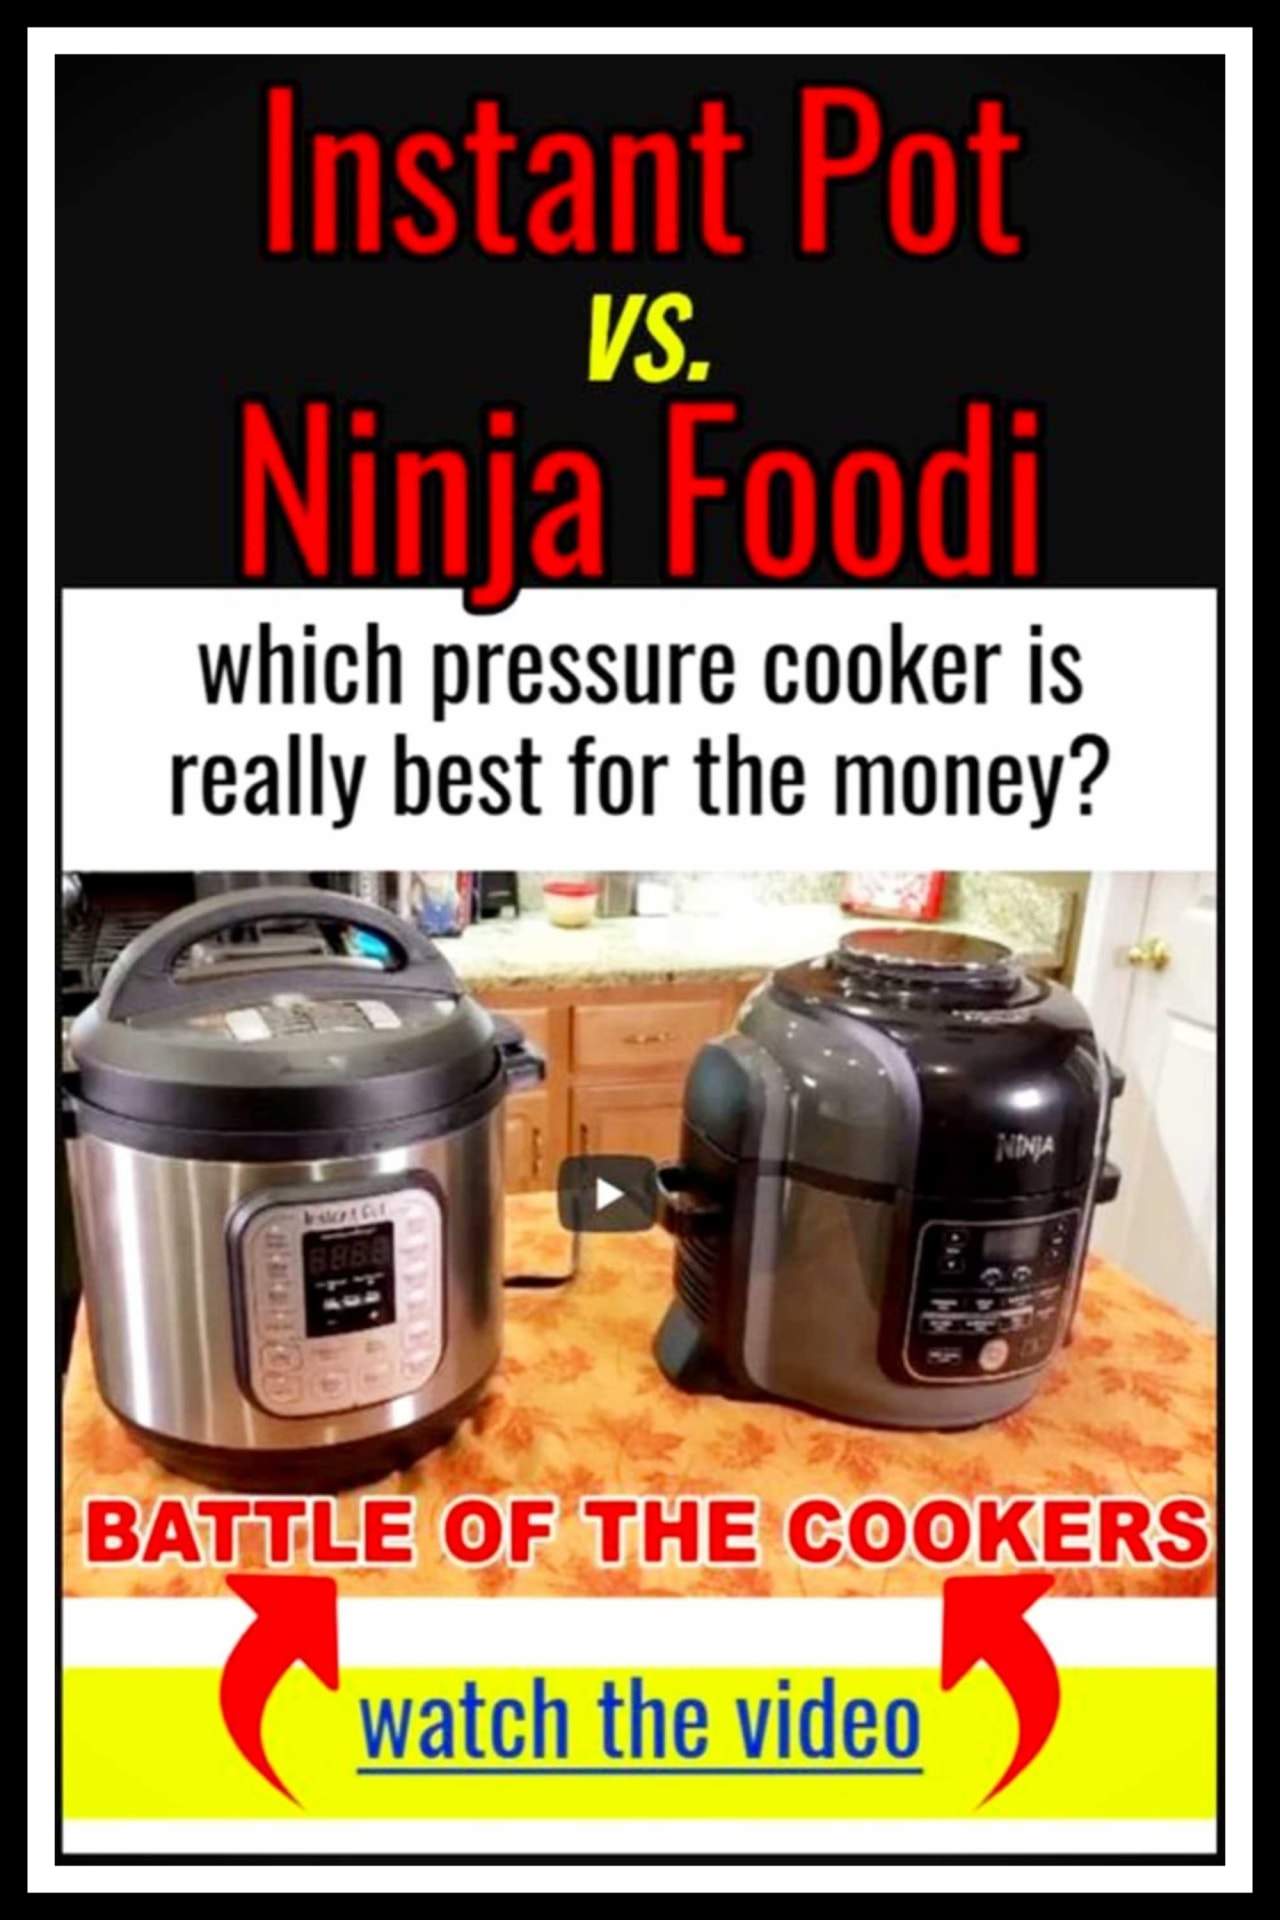 Instant Pot Cooking Times vs Ninja Foodi Electric Pressure Cooker cooking times - instnat pot tips and tricks for beginners cooking in a instant pot one pot pressure cooker